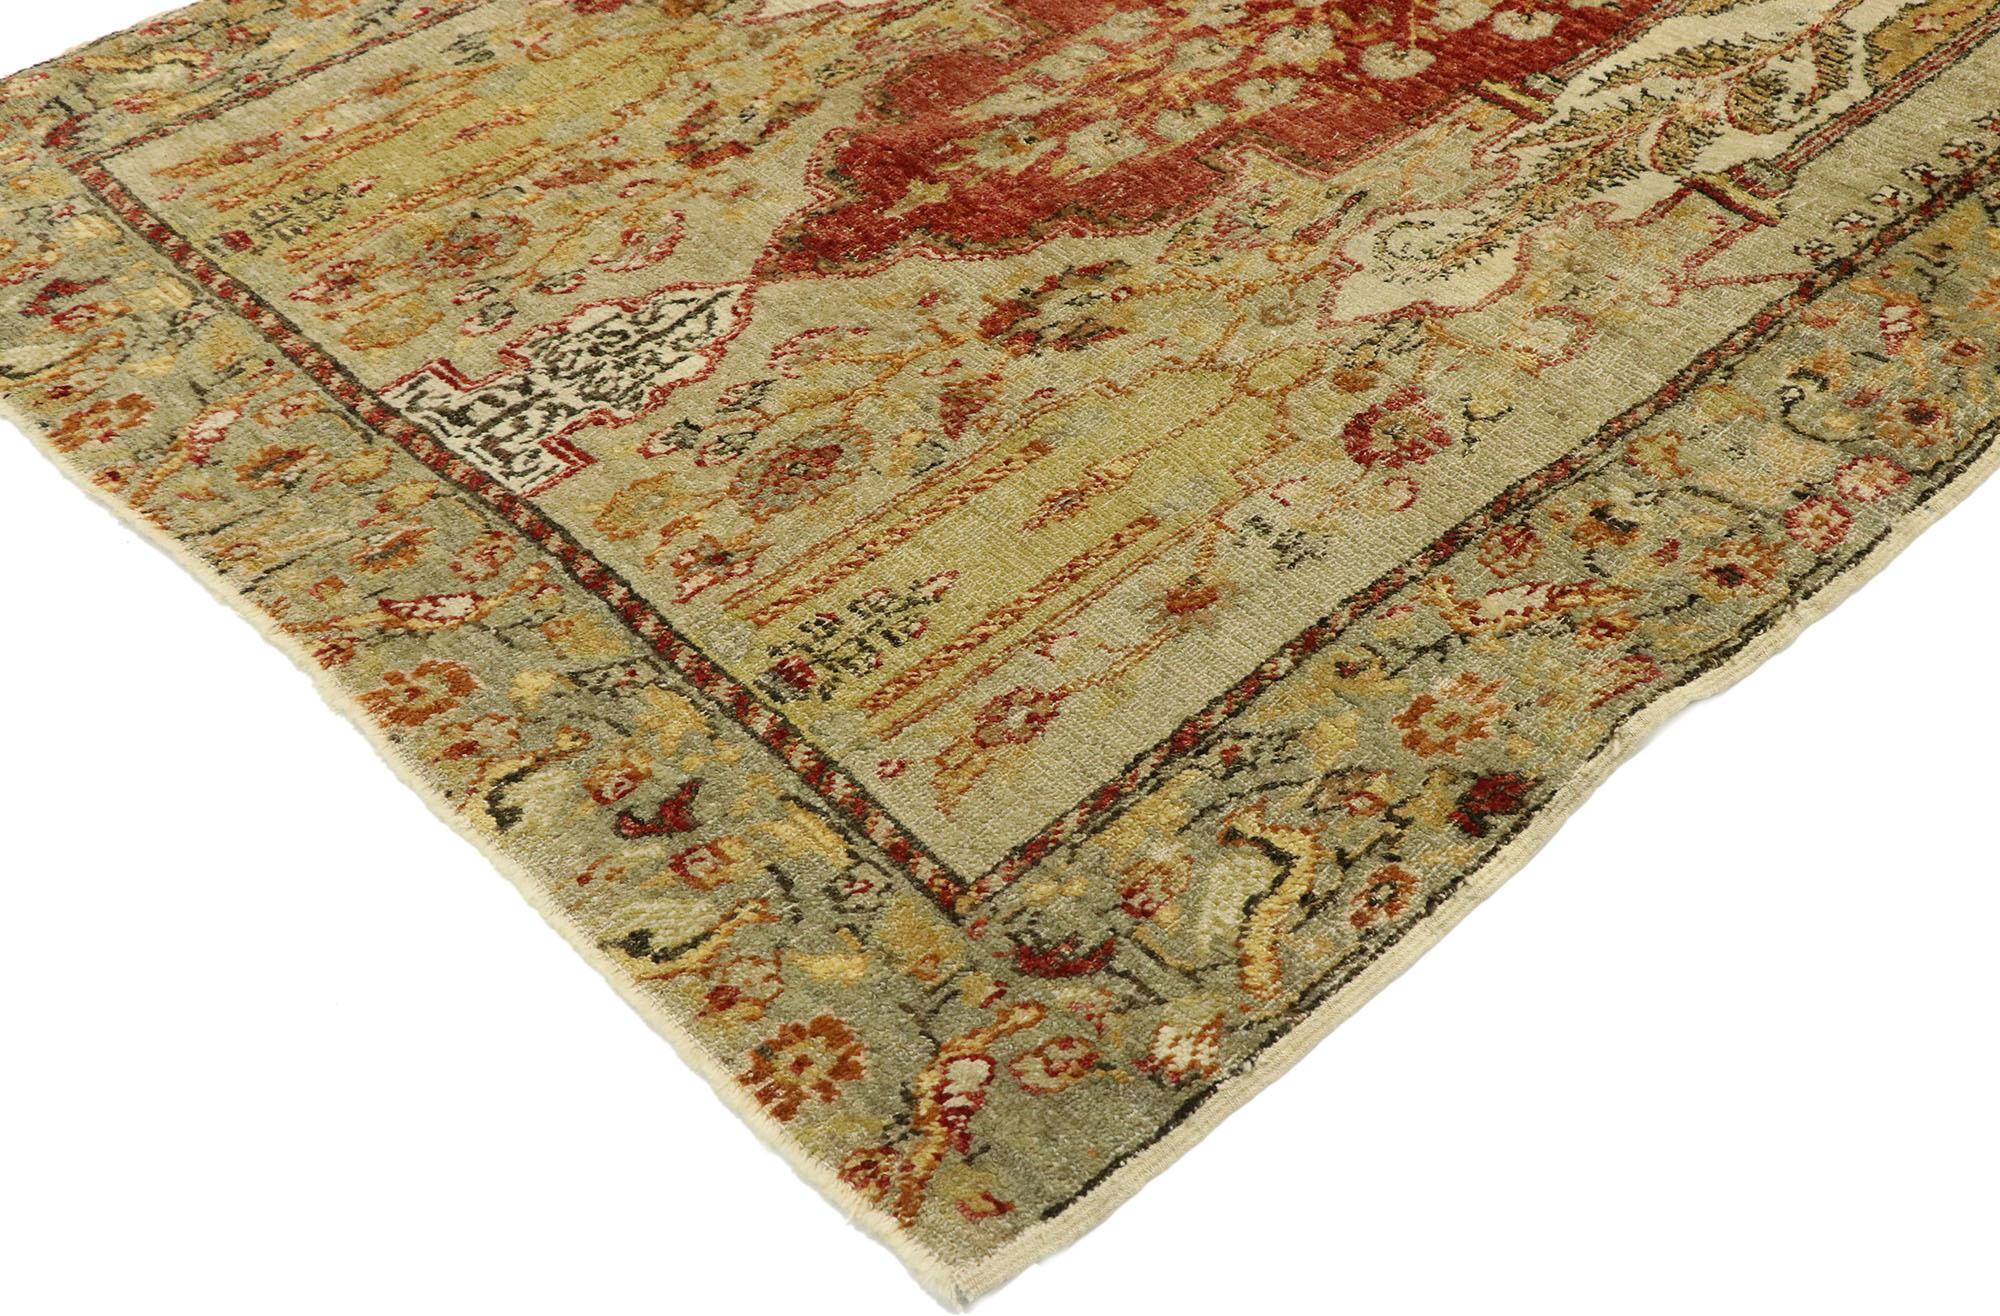 53071, vintage Turkish Oushak prayer rug with Rustic Tuscan style. Imbued with earthy-inspired hues and architectural elements of naturalistic forms, this hand knotted wool vintage Turkish Oushak rug beautifully embodies rustic Tuscan style. The